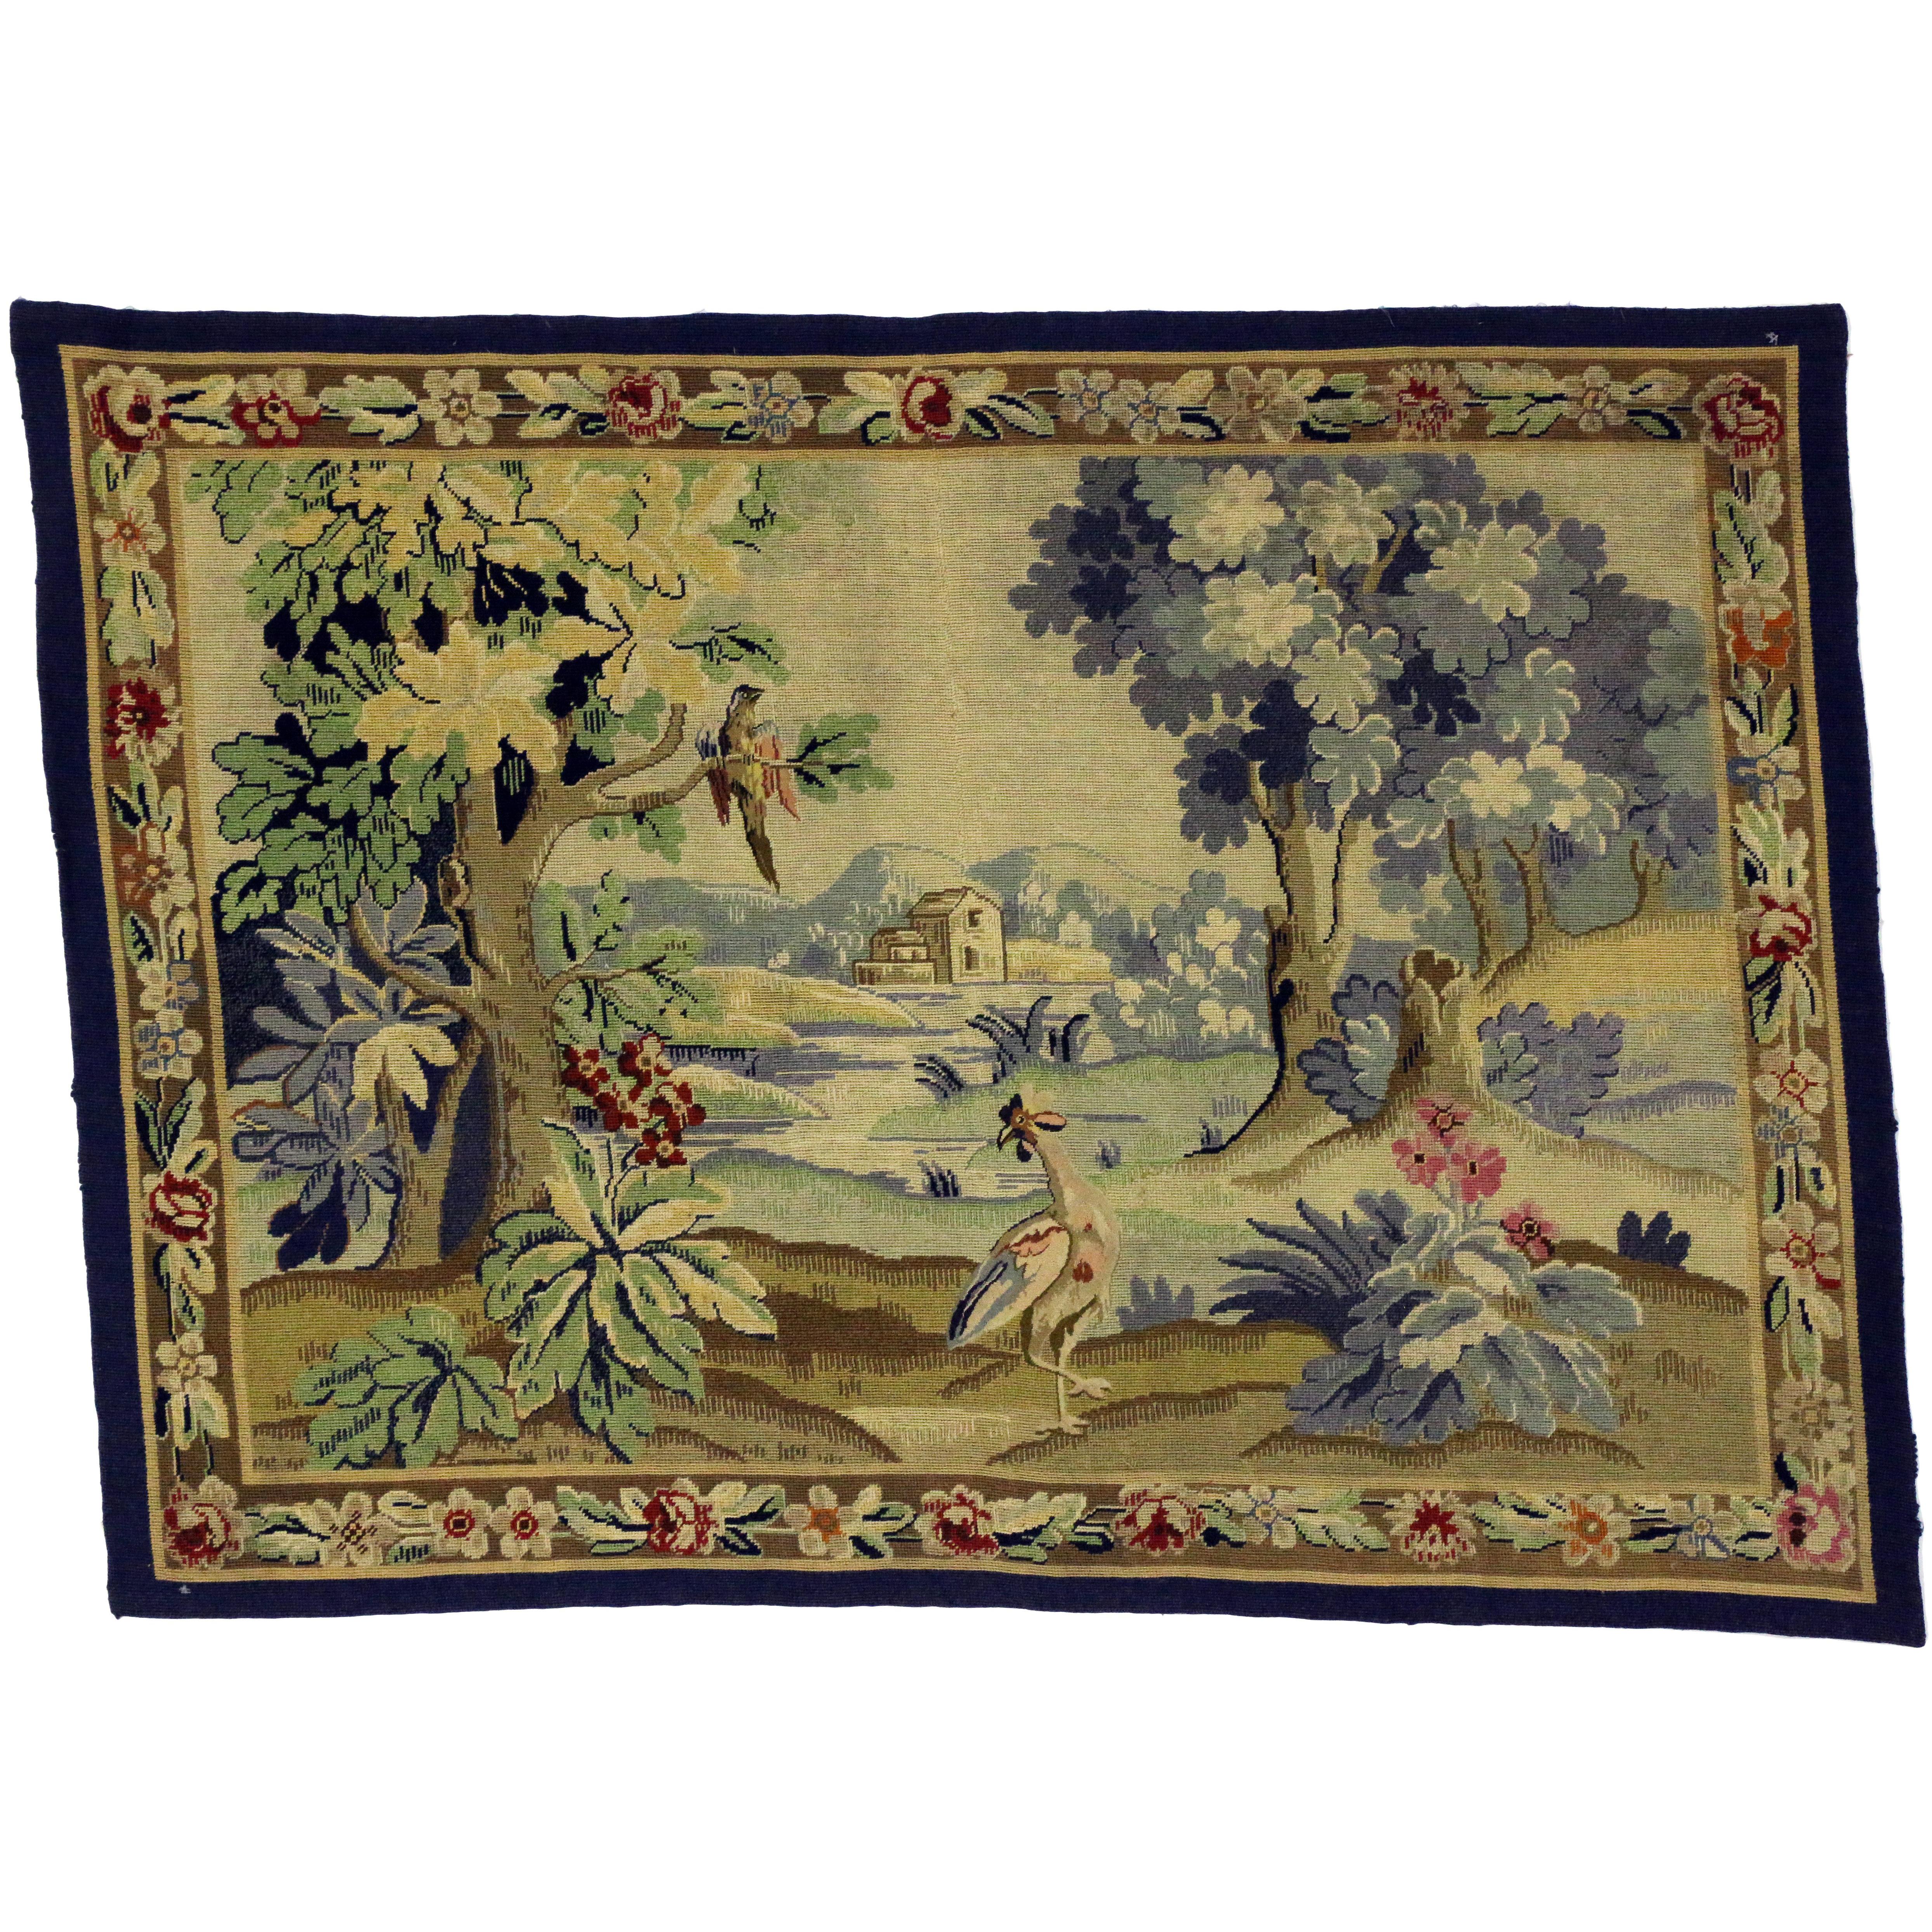 Antique English Needlepoint Aubusson Verdure Garden Tapestry Wall Hanging